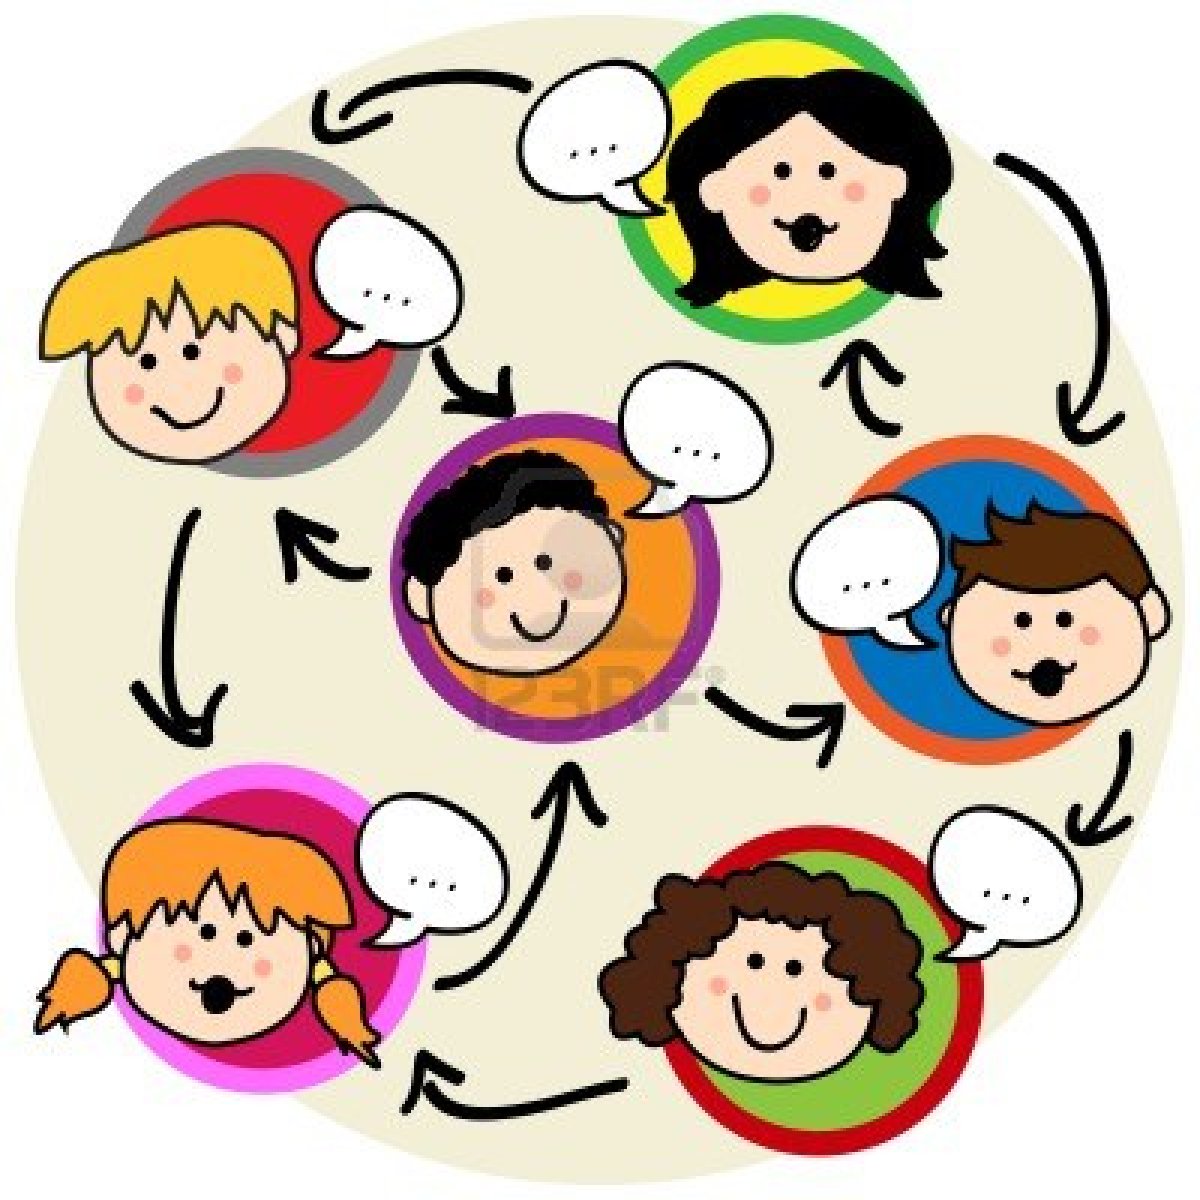 12064224-social-network-concept-fun-cartoon-of-kids-talking-and-being-interconnected